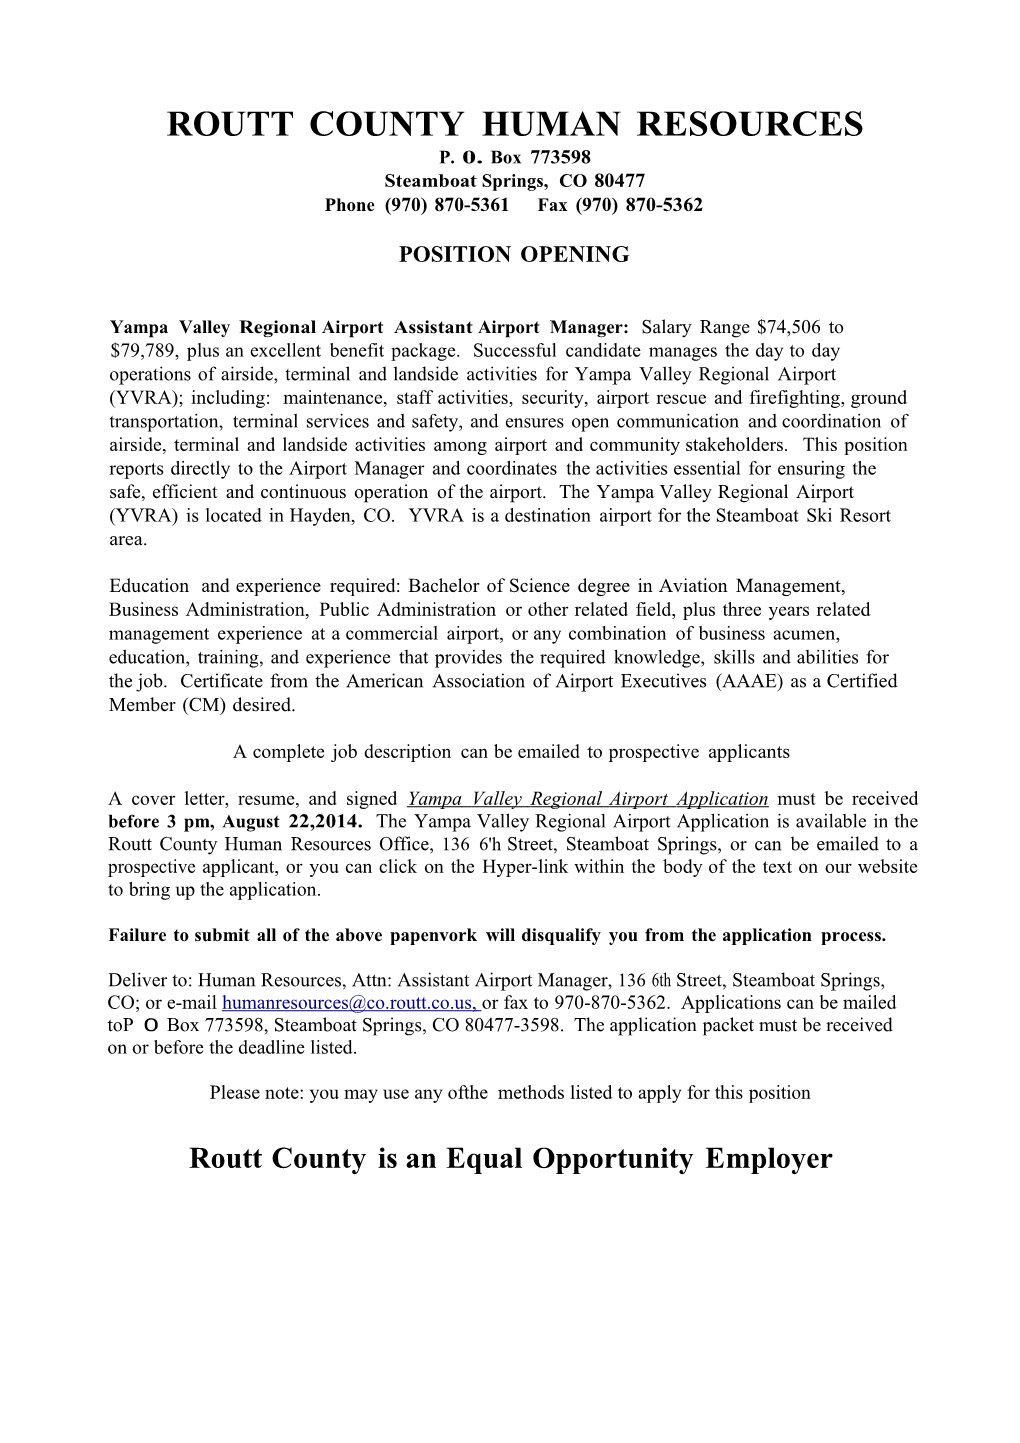 Routt County Human Resources